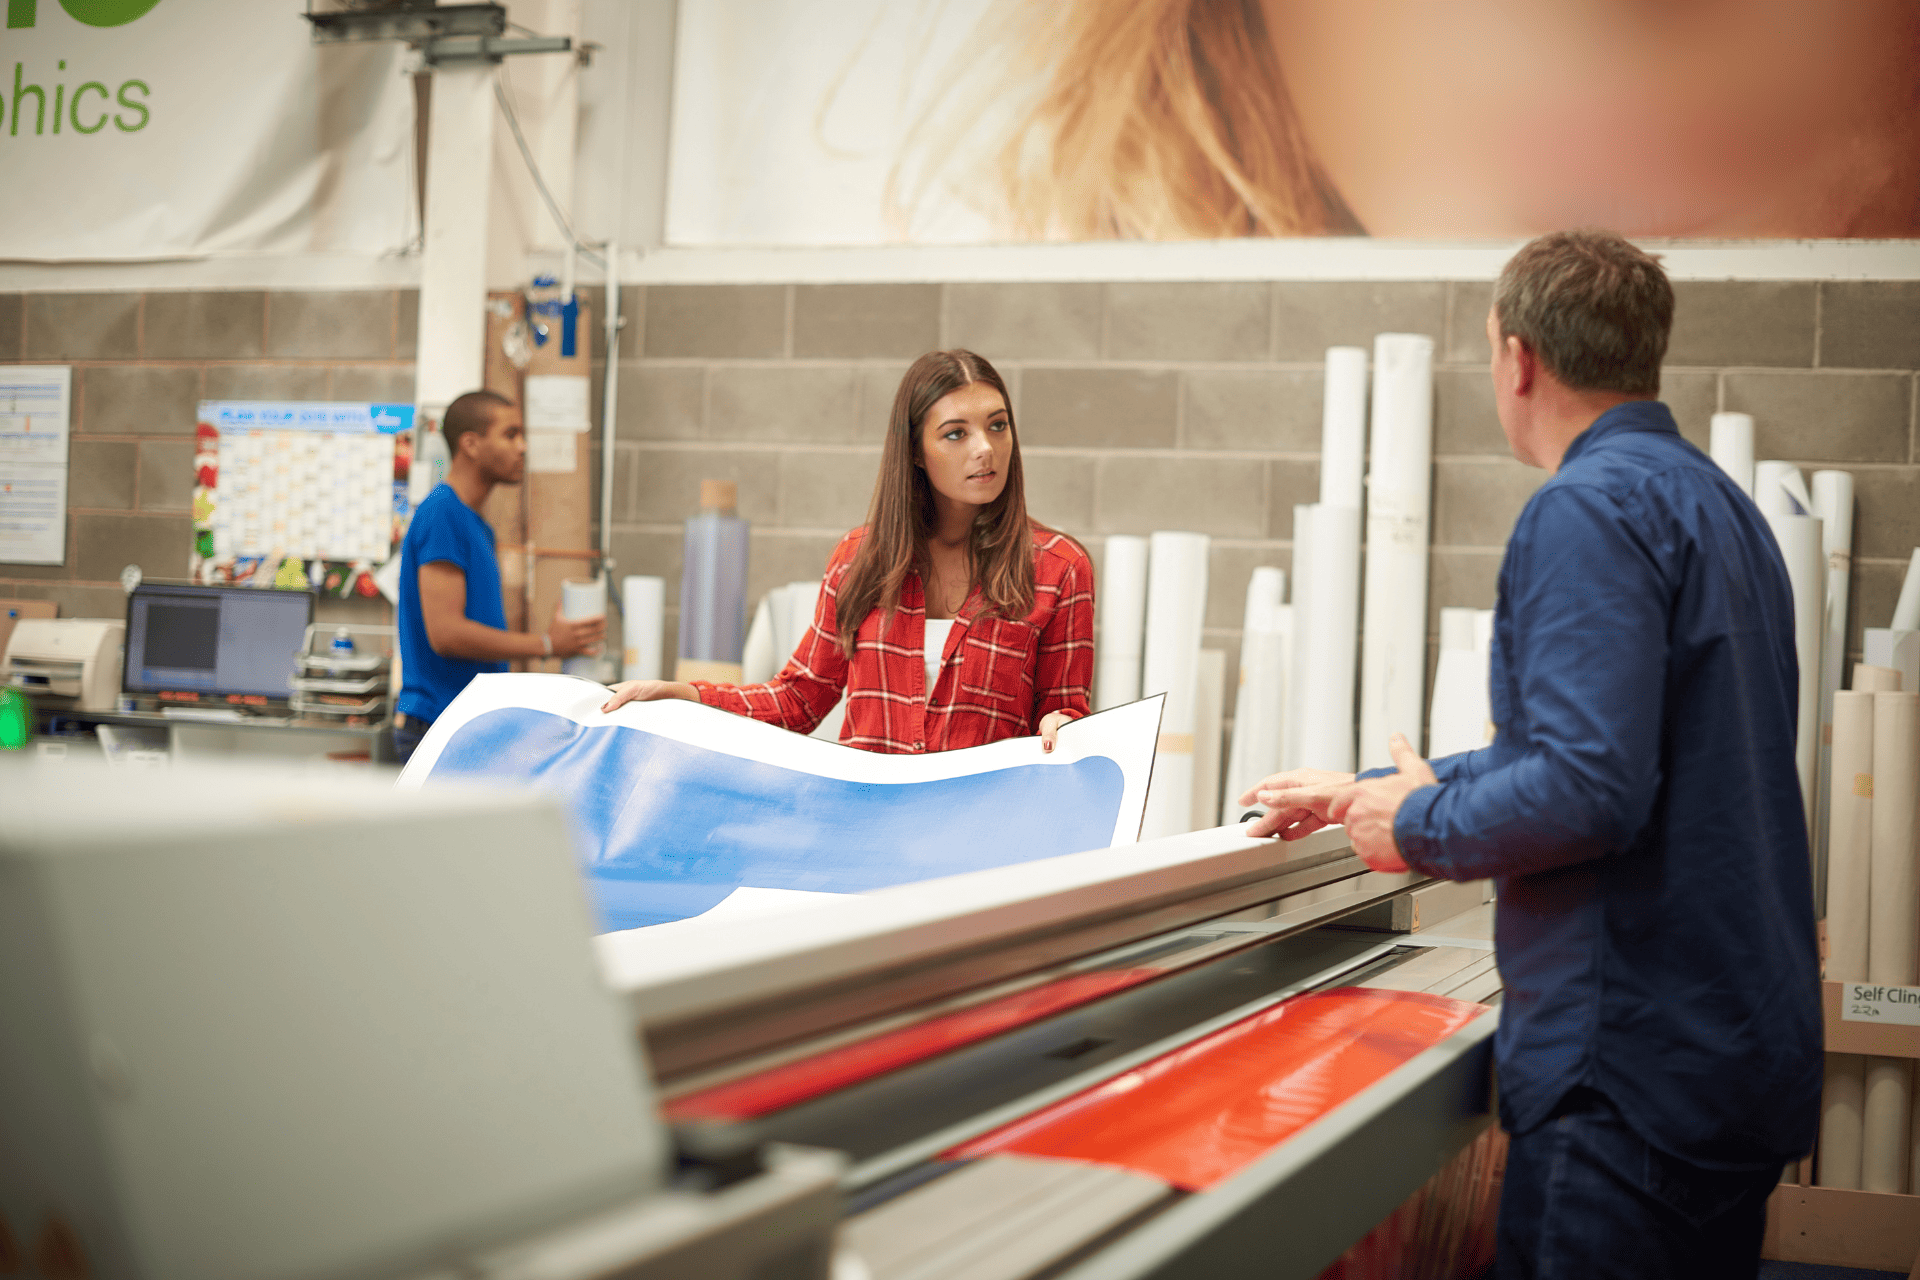 An event planner uses a large-scale printer to print a blue banner